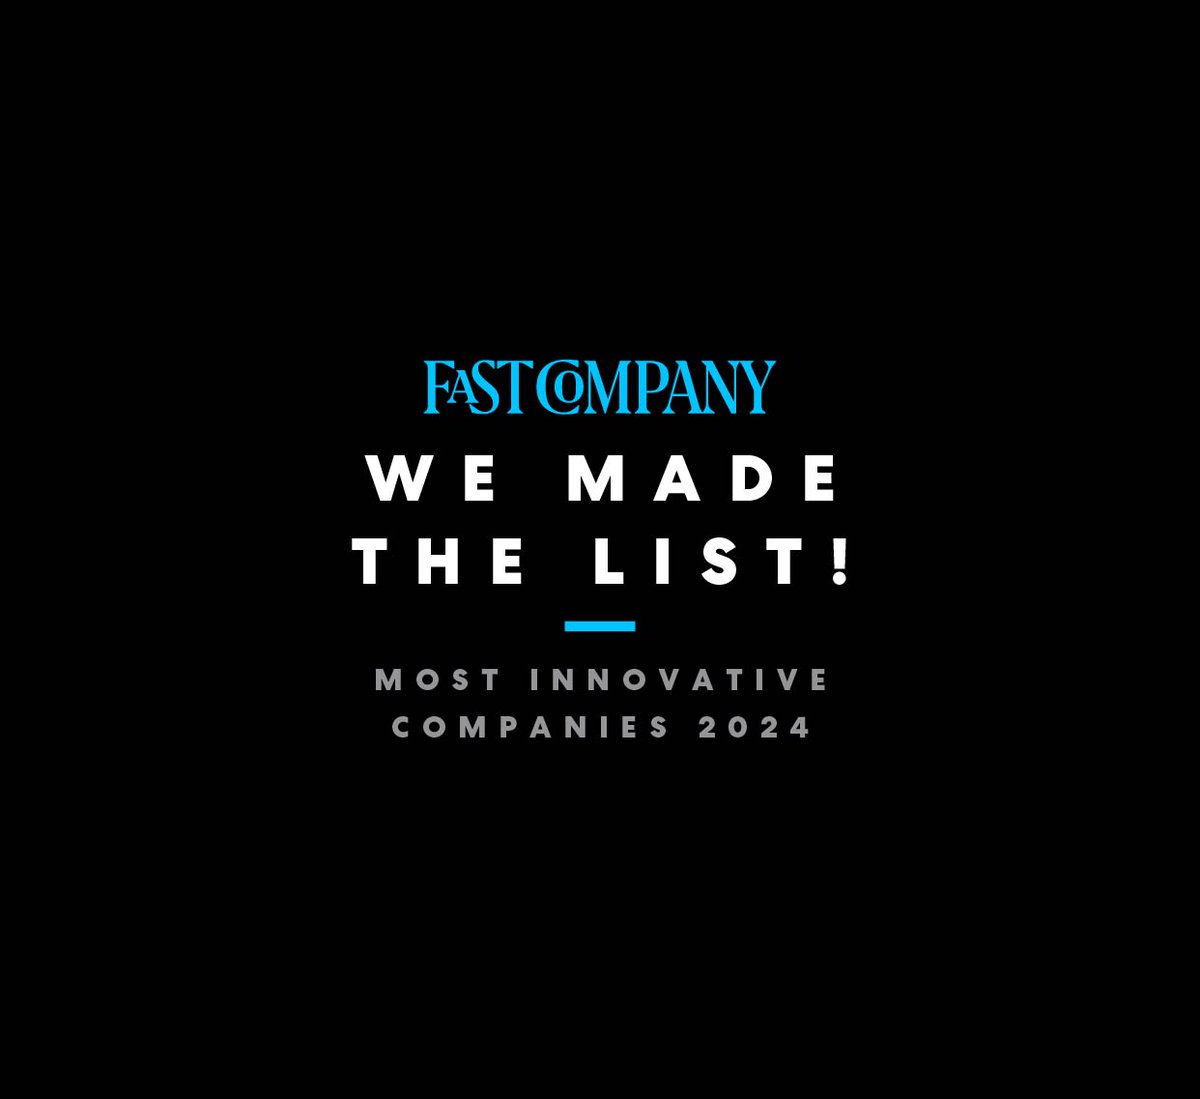 We’re honored to be named to @FastCompany's 2024 World’s Most Innovative Companies list for the third year in a row for our work innovating breakthrough biotech platforms to take bigger leaps for patients and the planet: bit.ly/3PsFXts #FCMostInnovative #BiggerLeaps